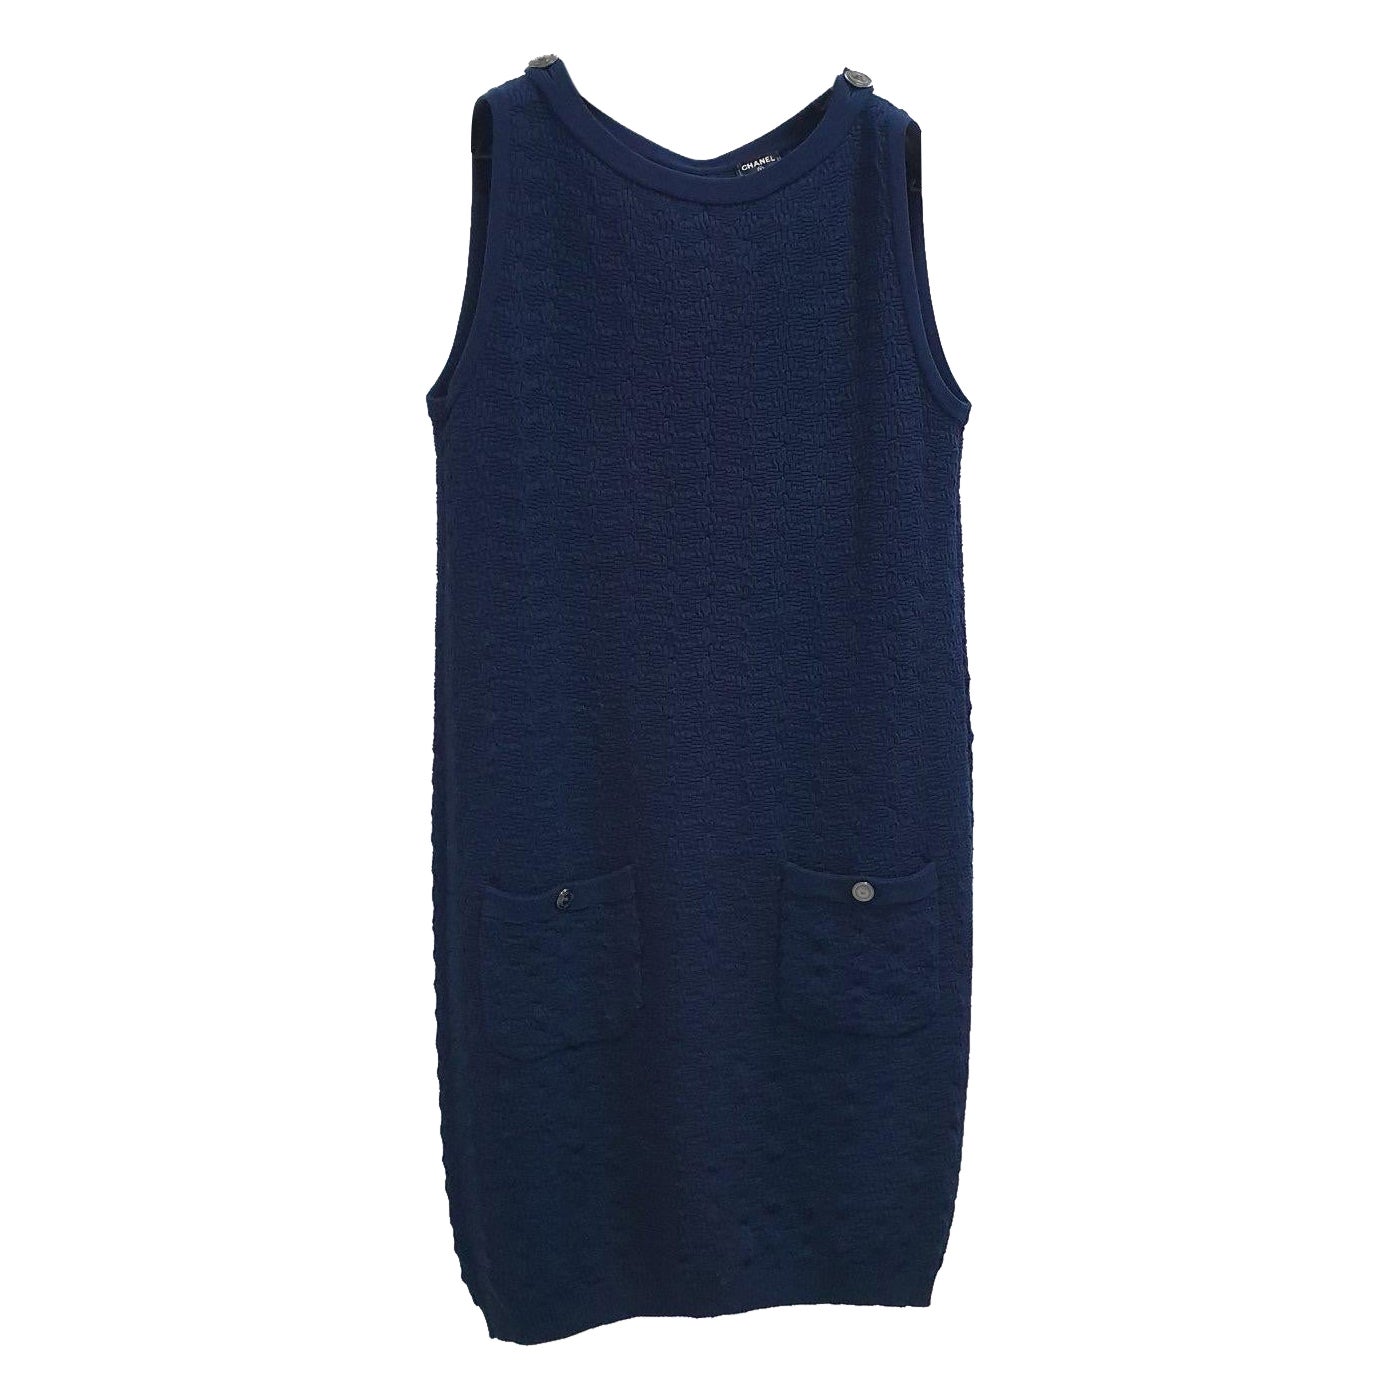 Chanel Navy Blue Textured Cotton Jacquard Knit Sleeveless Dres